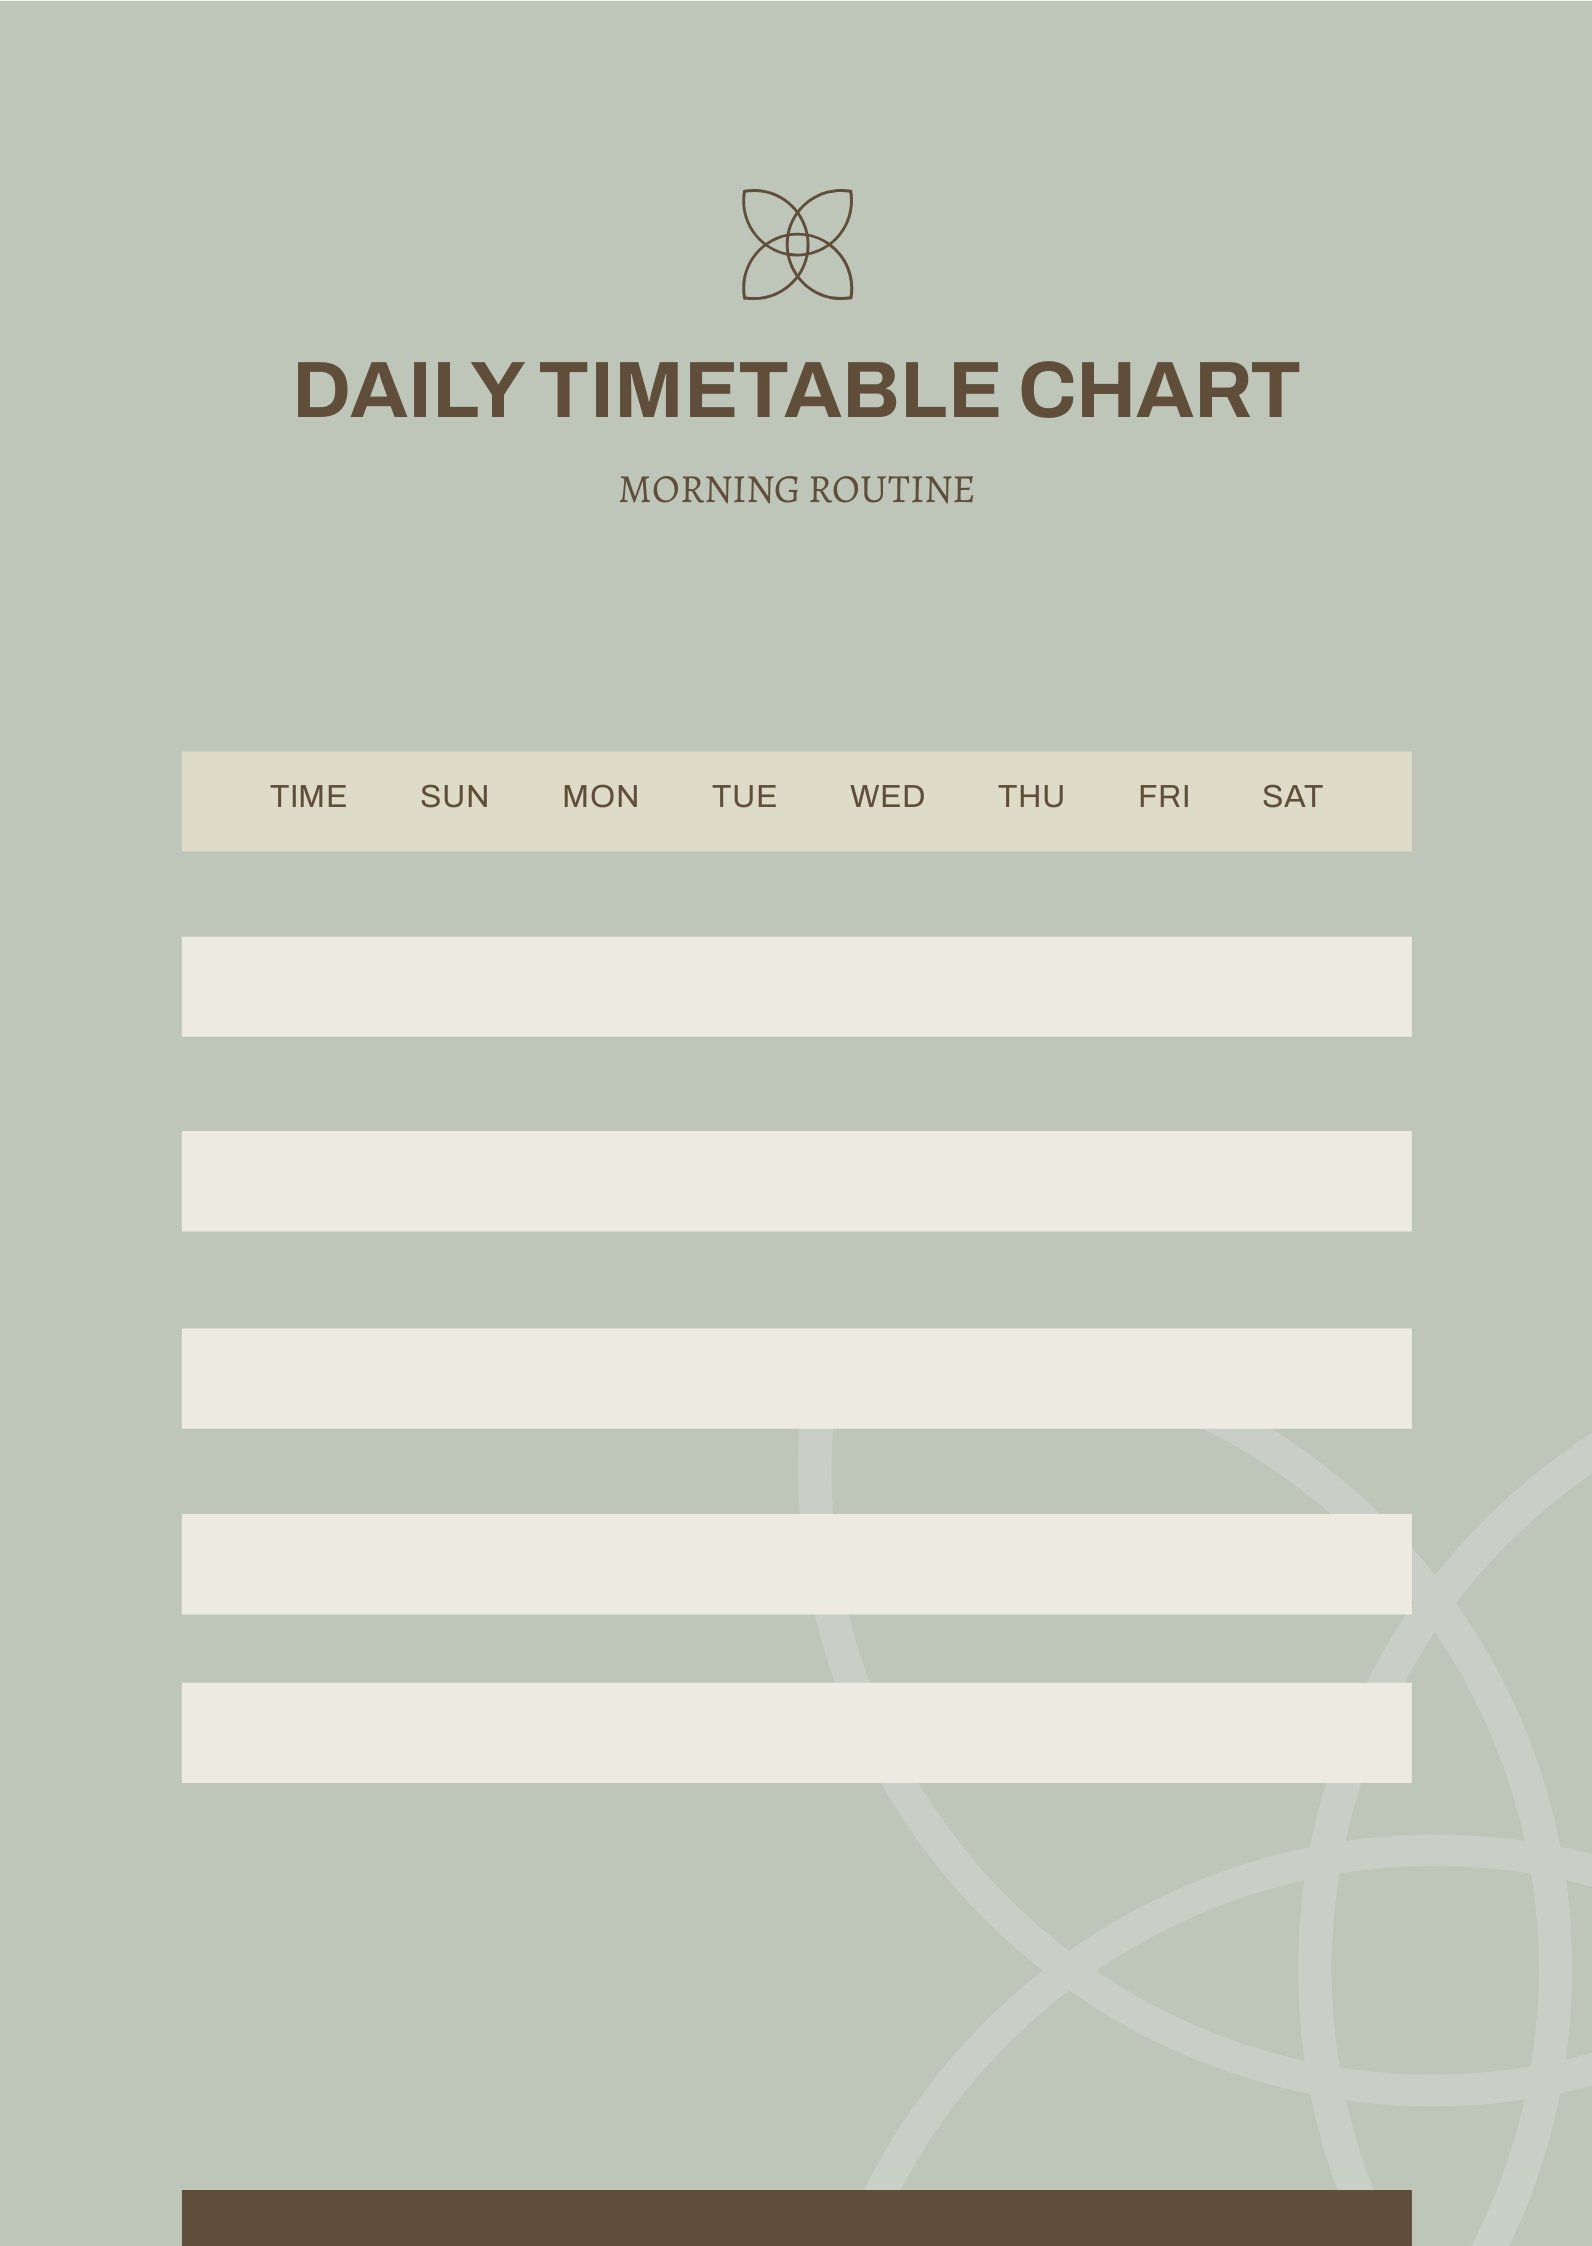 Daily Time Table Chart Template